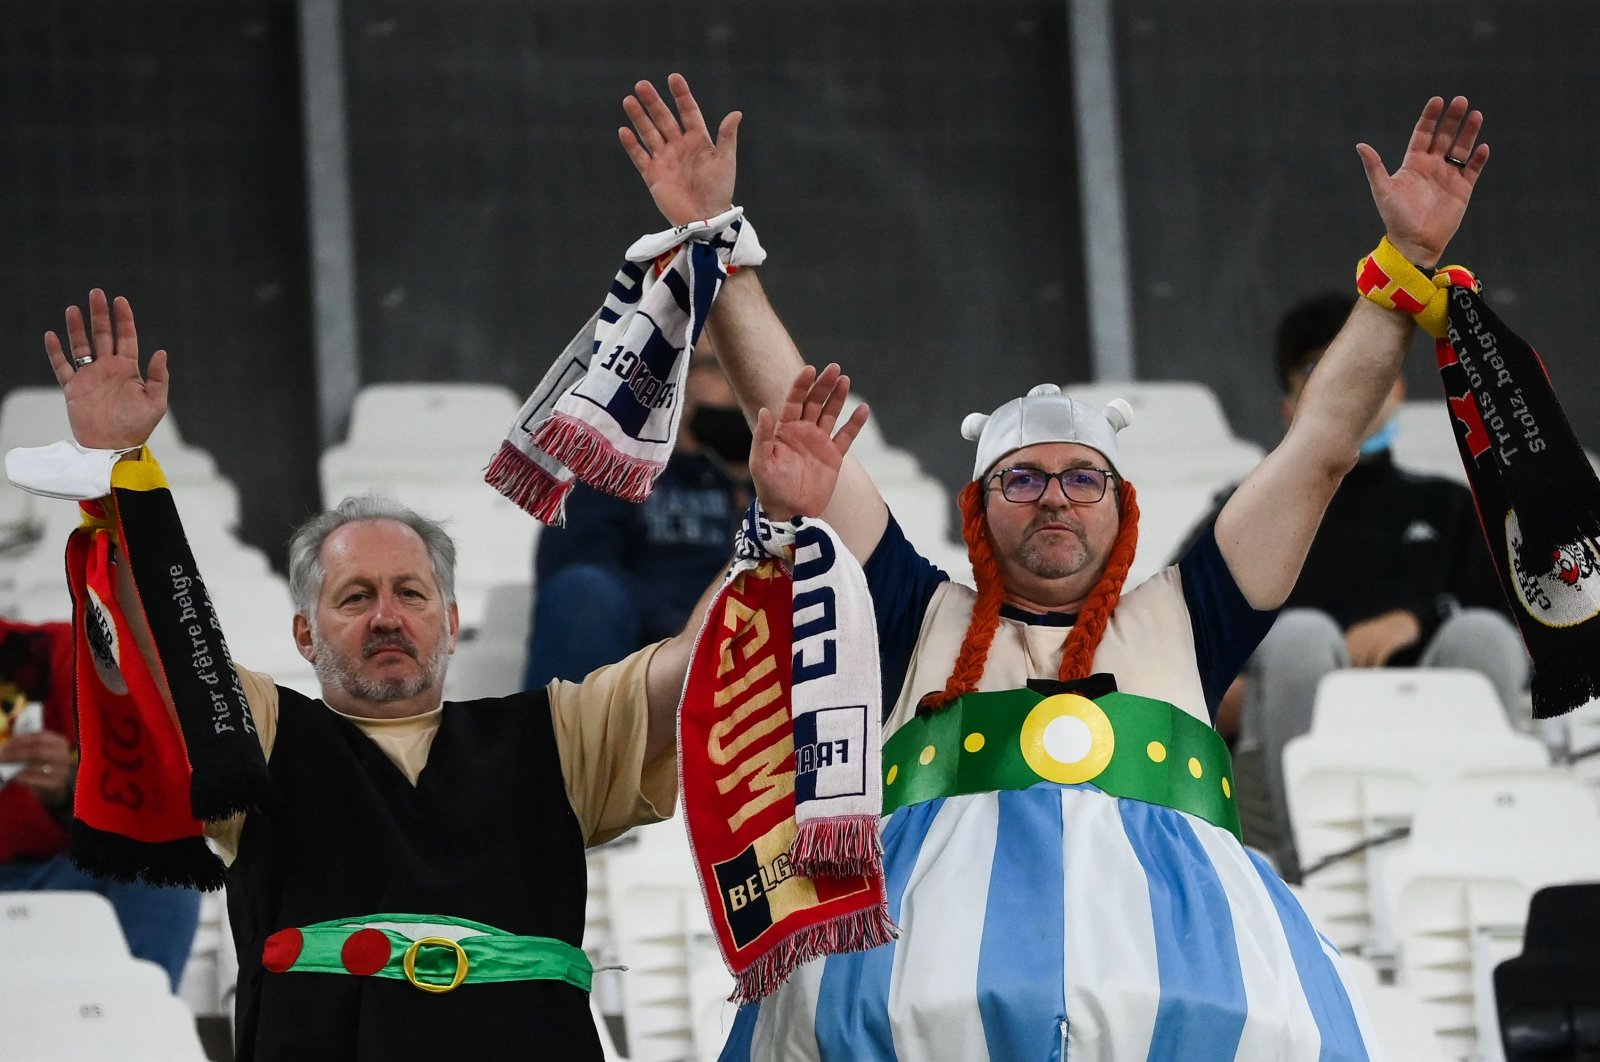 France's supporters dressed like comic characters Asterix and Obelix cheer prior to the UEFA Nations League semifinal football match between Belgium and France at the Juventus stadium in Turin, Italy, Oct. 7, 2021. (AFP Photo)